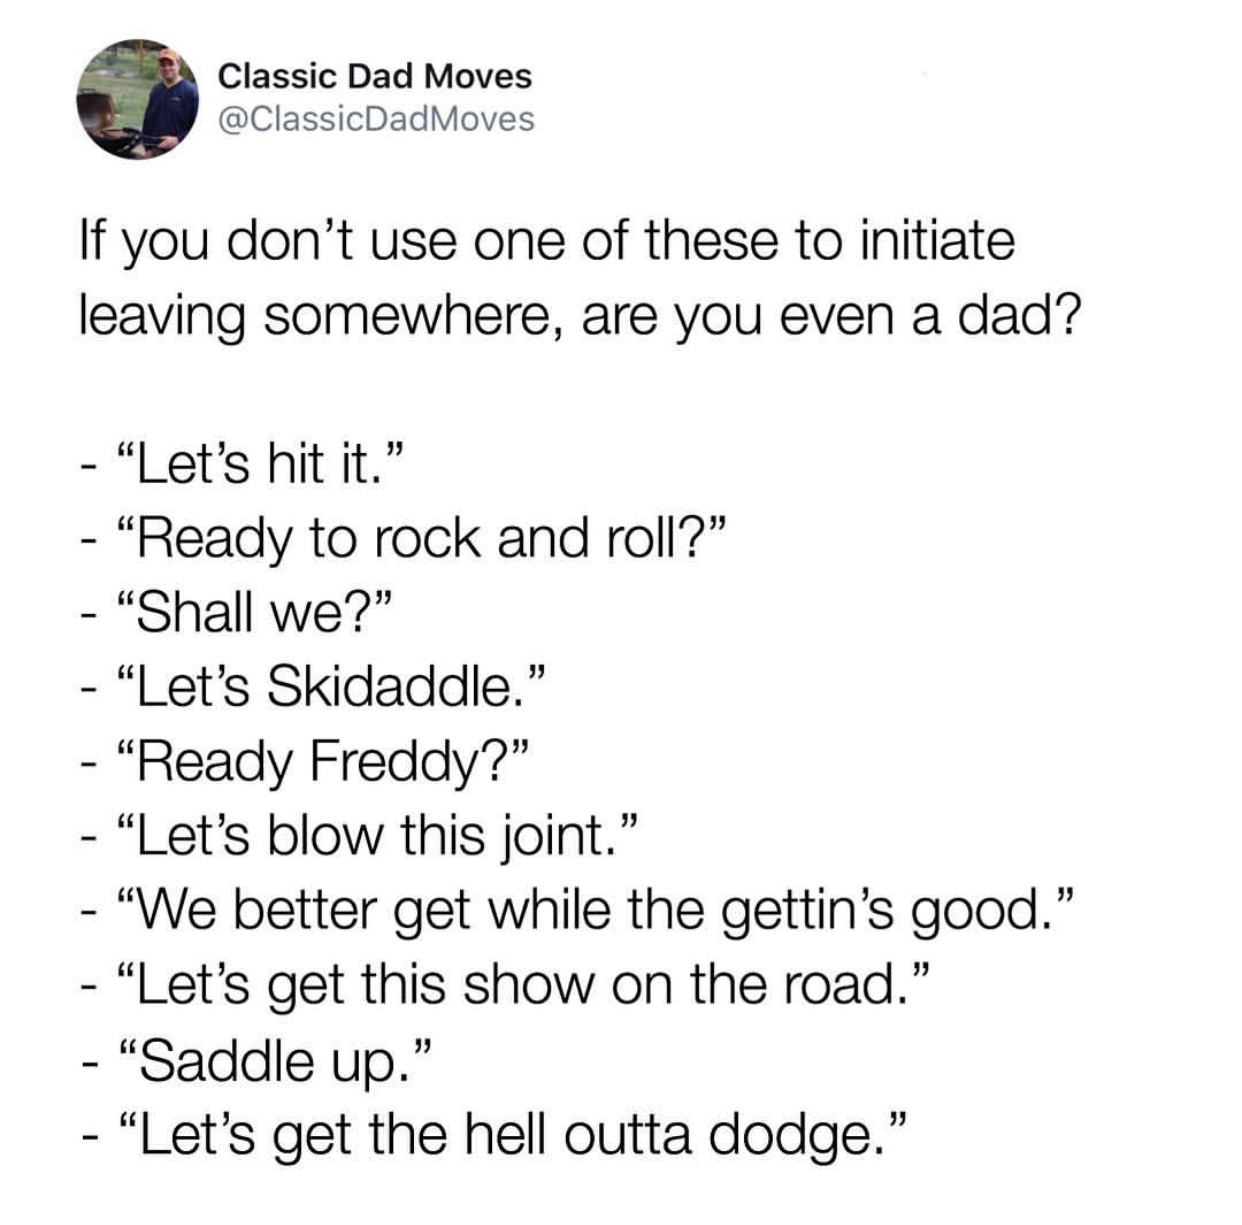 angle - Classic Dad Moves Moves If you don't use one of these to initiate leaving somewhere, are you even a dad? "Let's hit it. "Ready to rock and roll? "Shall we?" "Let's Skidaddle." "Ready Freddy?" Let's blow this joint. "We better get while the gettin'